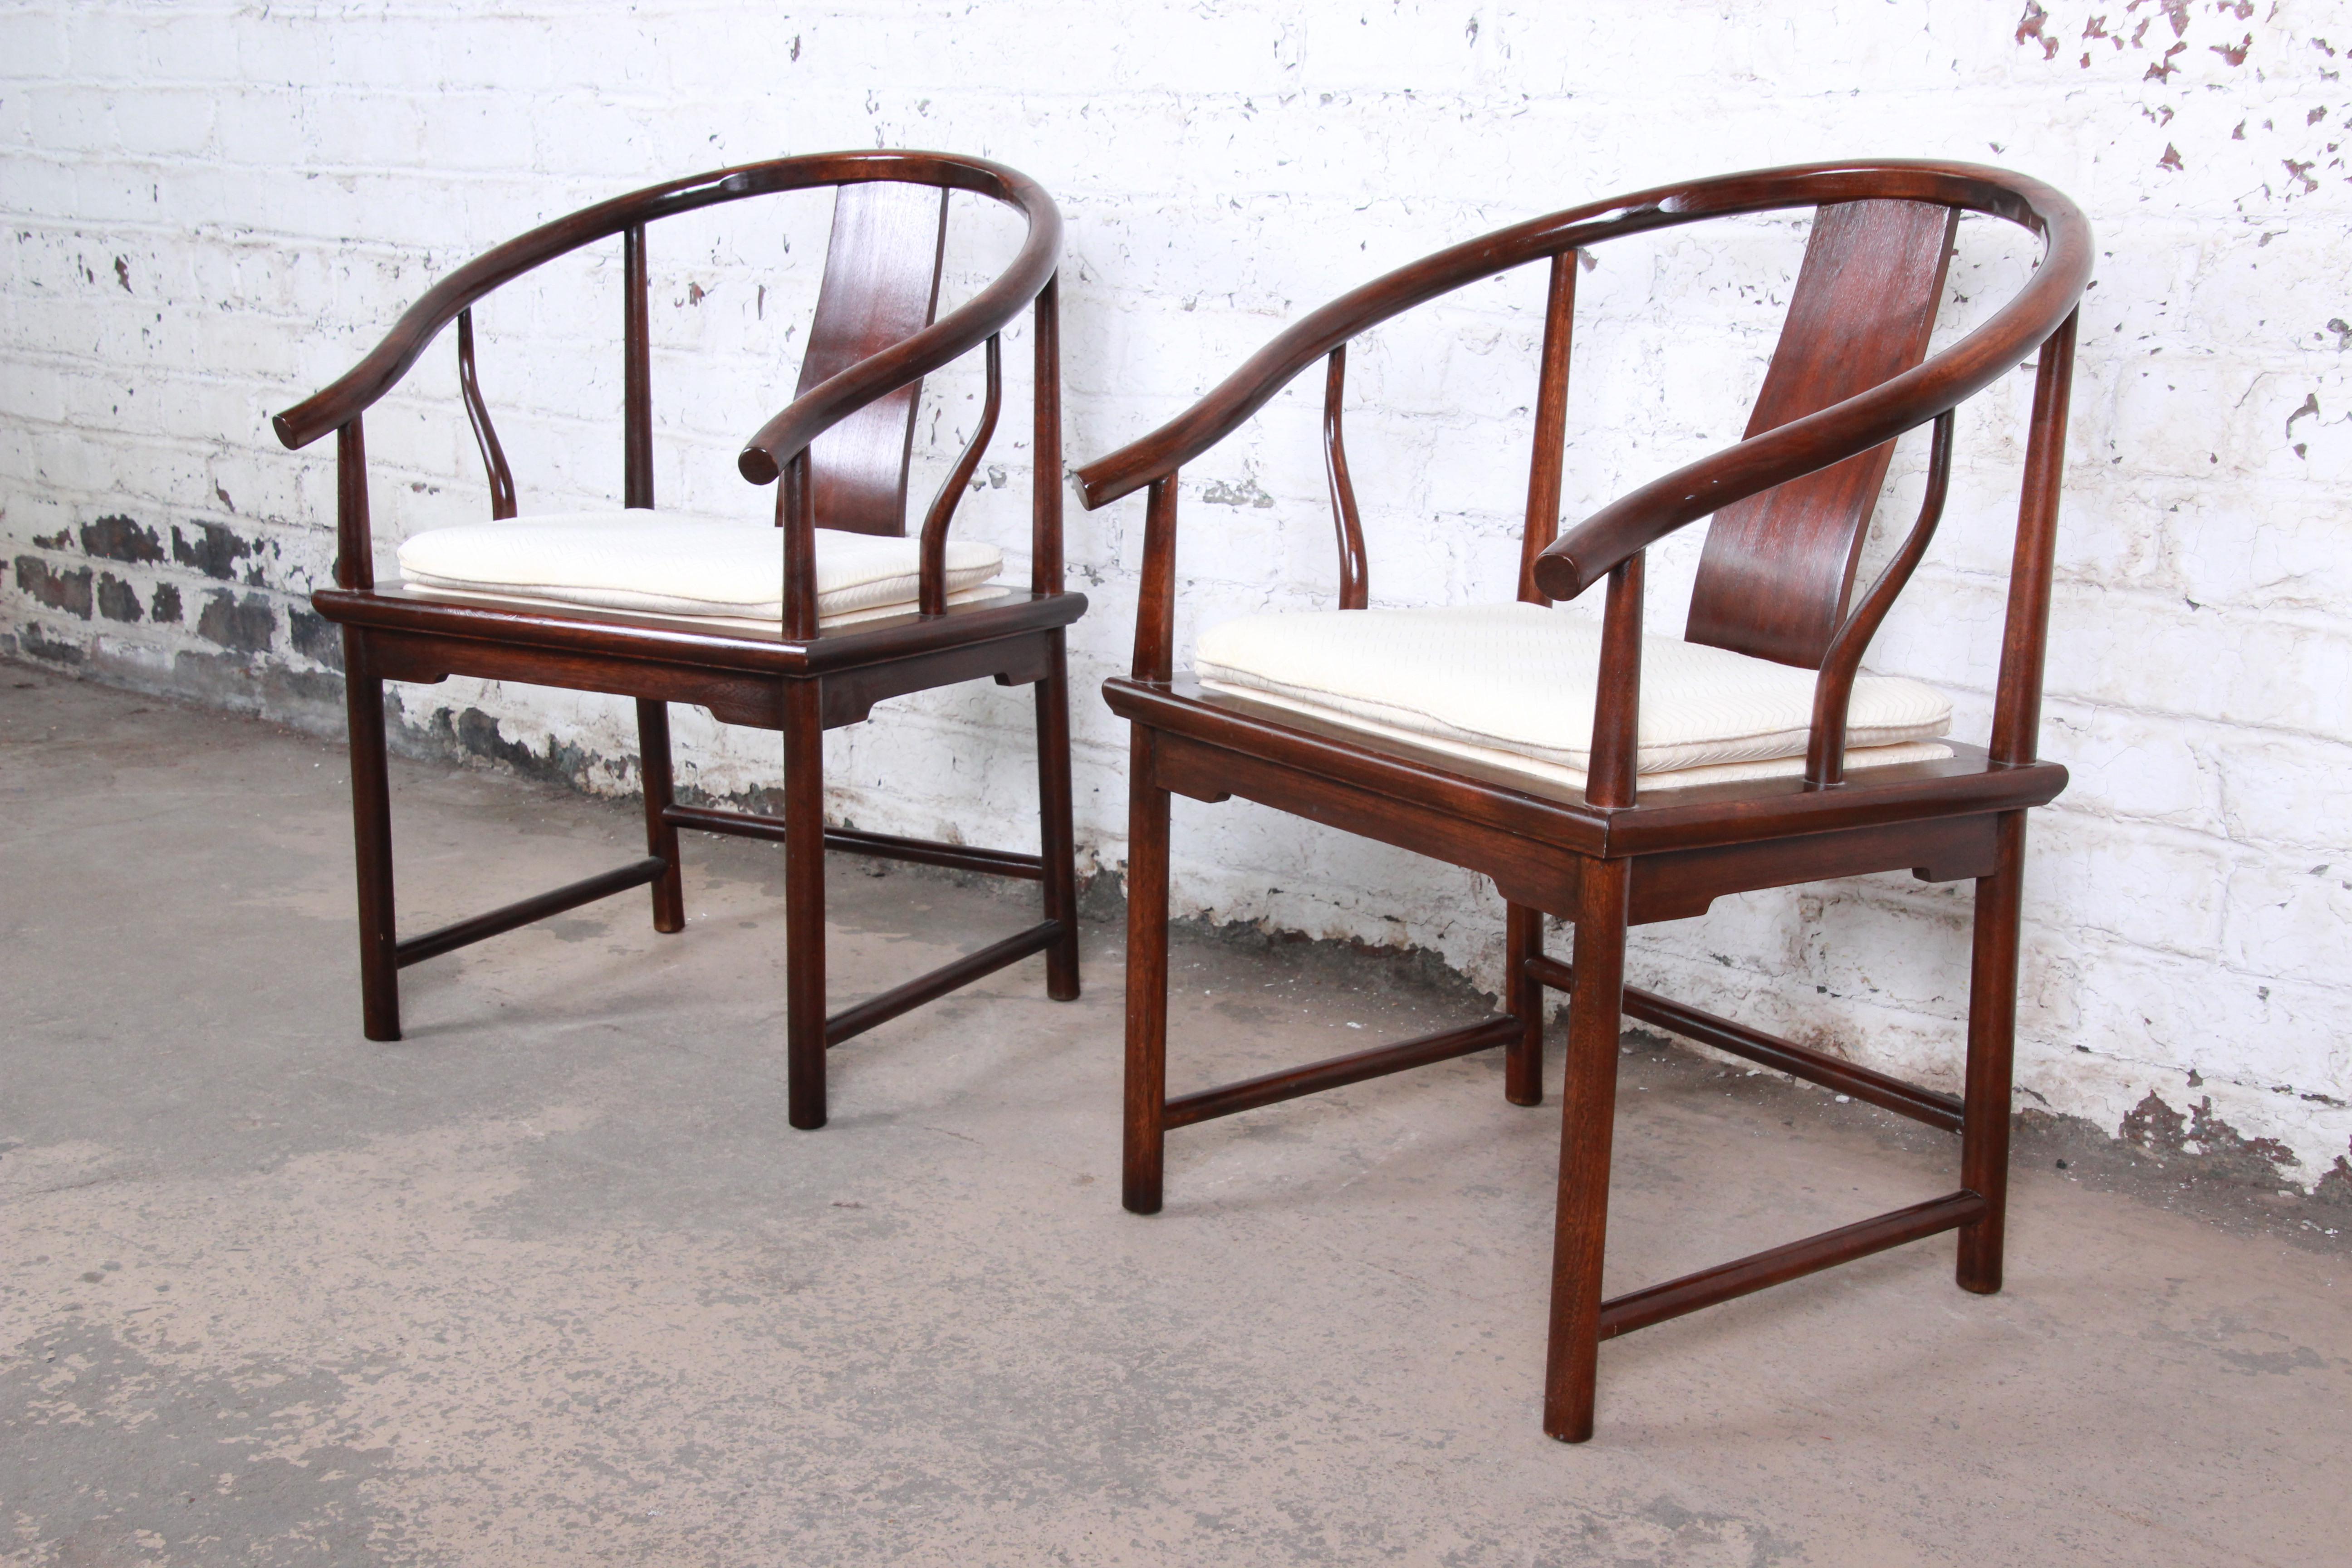 An exceptional pair of Hollywood Regency chinoiserie club chairs designed by Michael Taylor for his Far East collection for Baker Furniture. The chairs feature solid walnut frames with an Asian-inspired horseshoe design. The ivory upholstery with